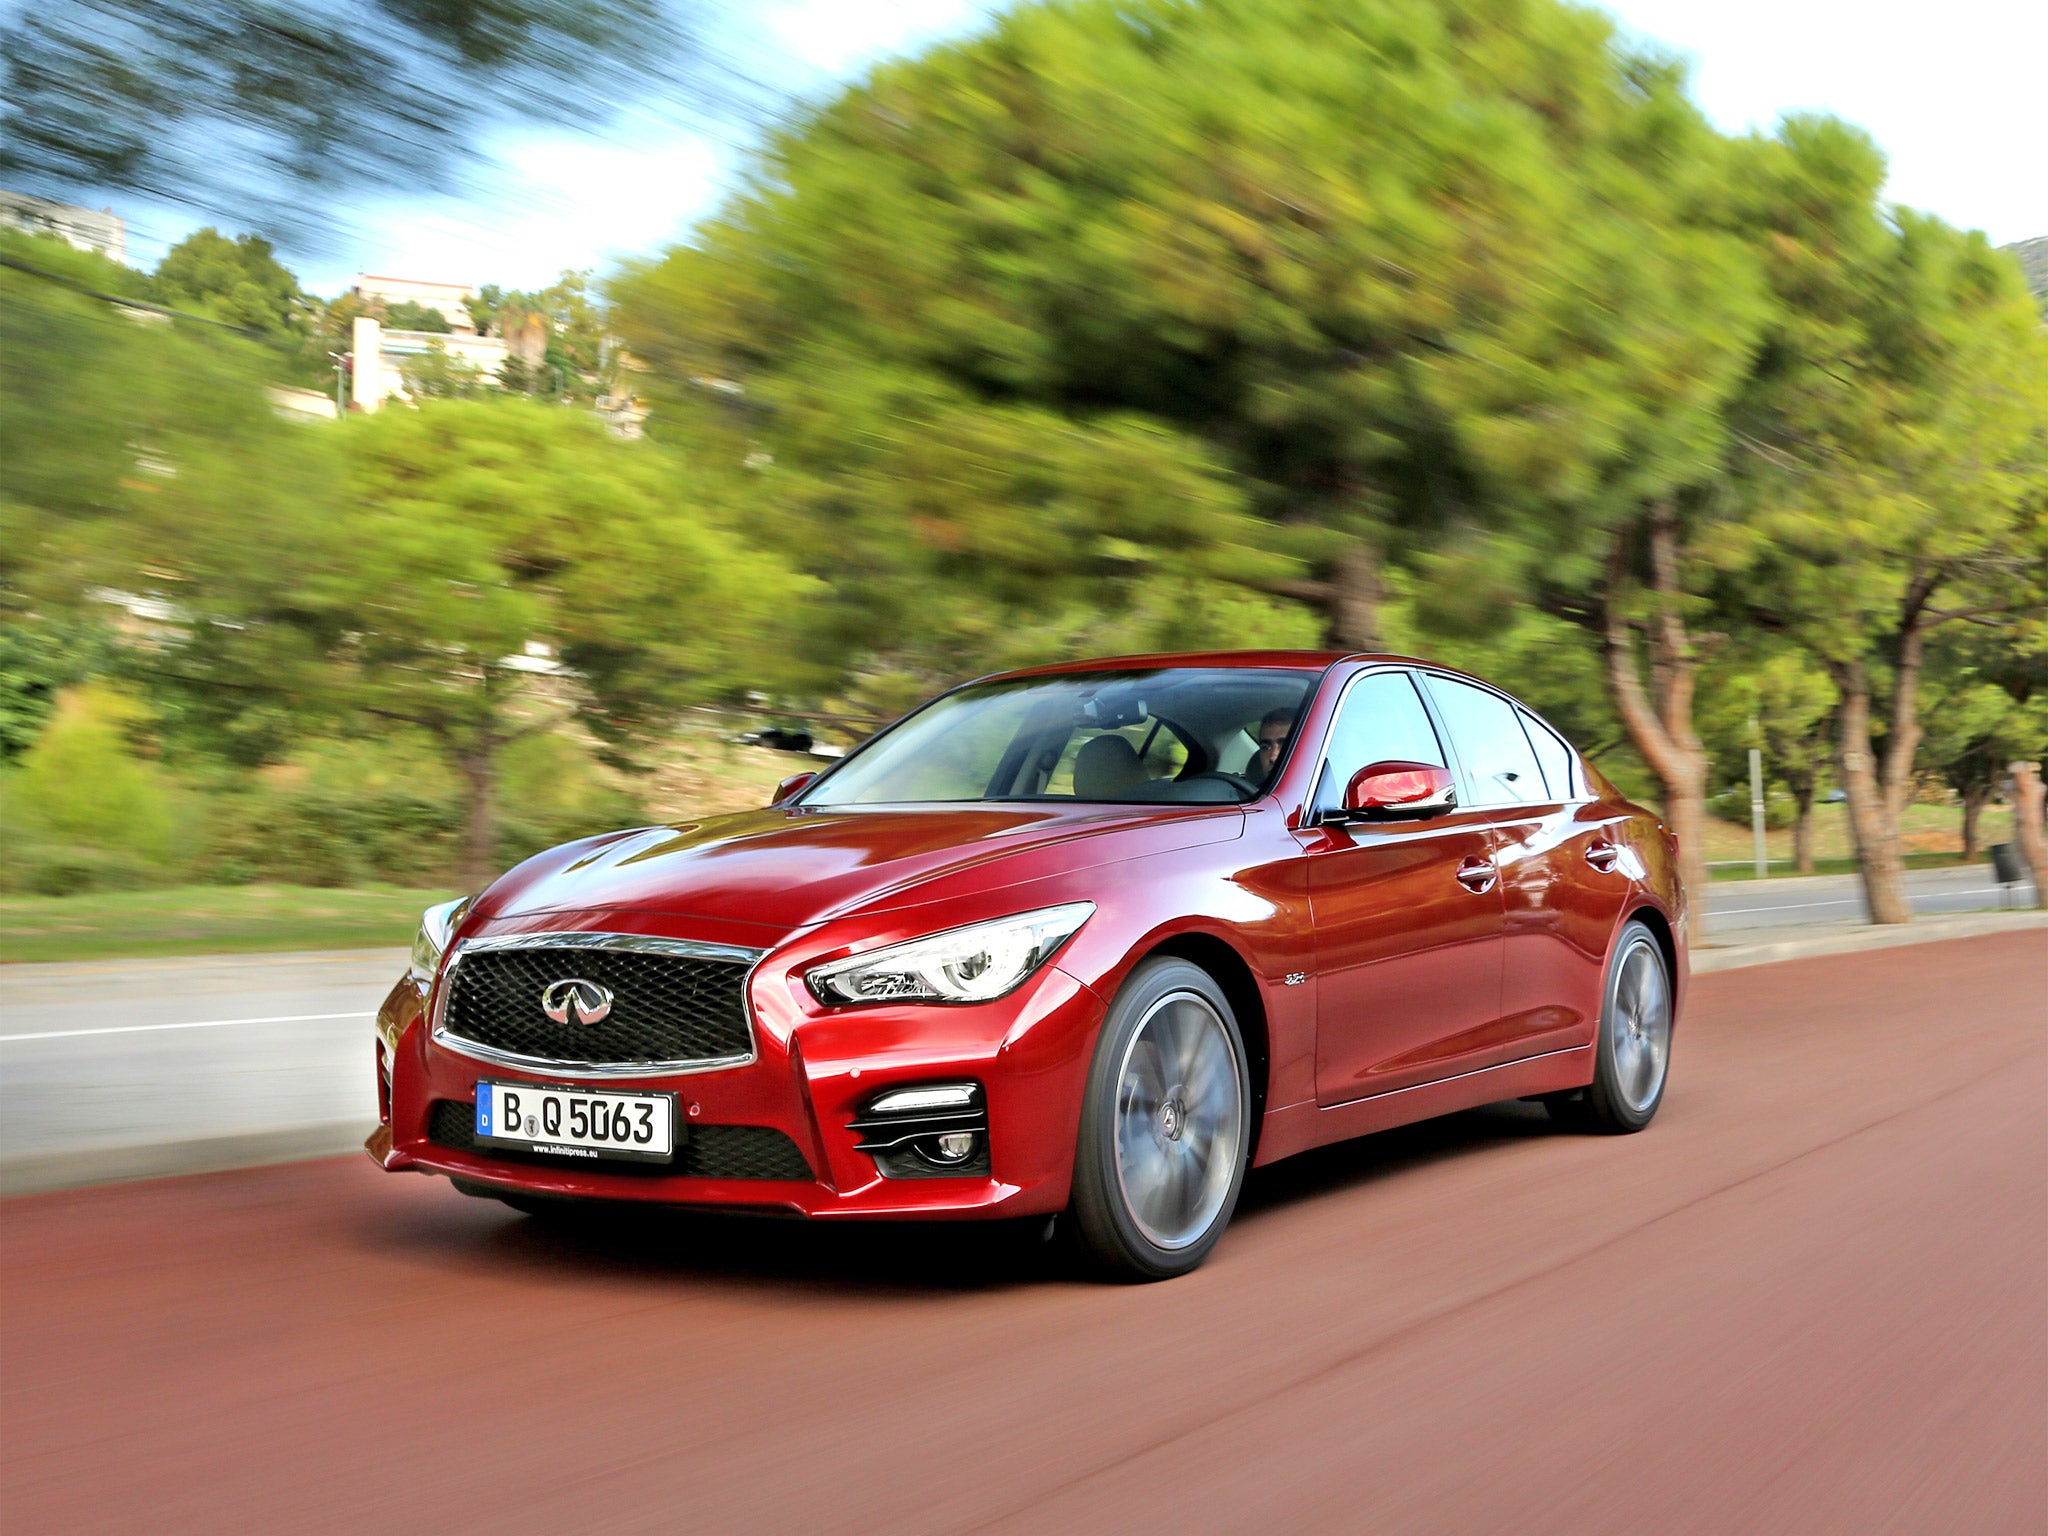 The Infiniti Q50 comes with social network apps built in as standard